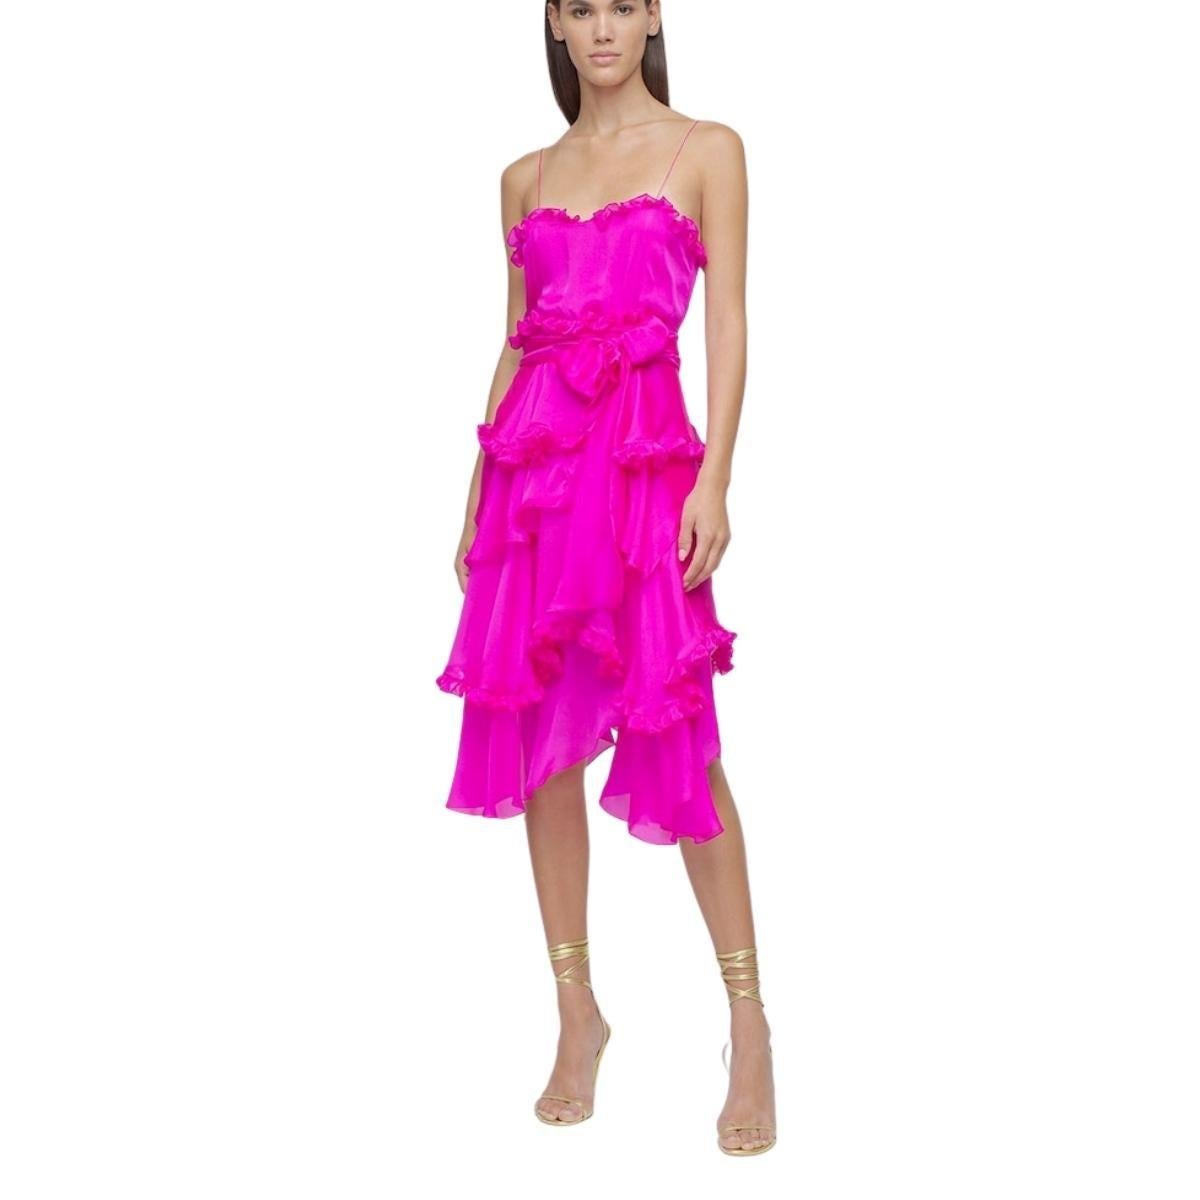 Elevate your elegant collection with this Ruffle Dress from Alexandre Vauthier. 
Cut in a sleeveless style with spaghetti shoulder straps
Concealed back zip closure
Front self-tie half belt
All over ruffles
Unlined
Fits true to size
Composition: